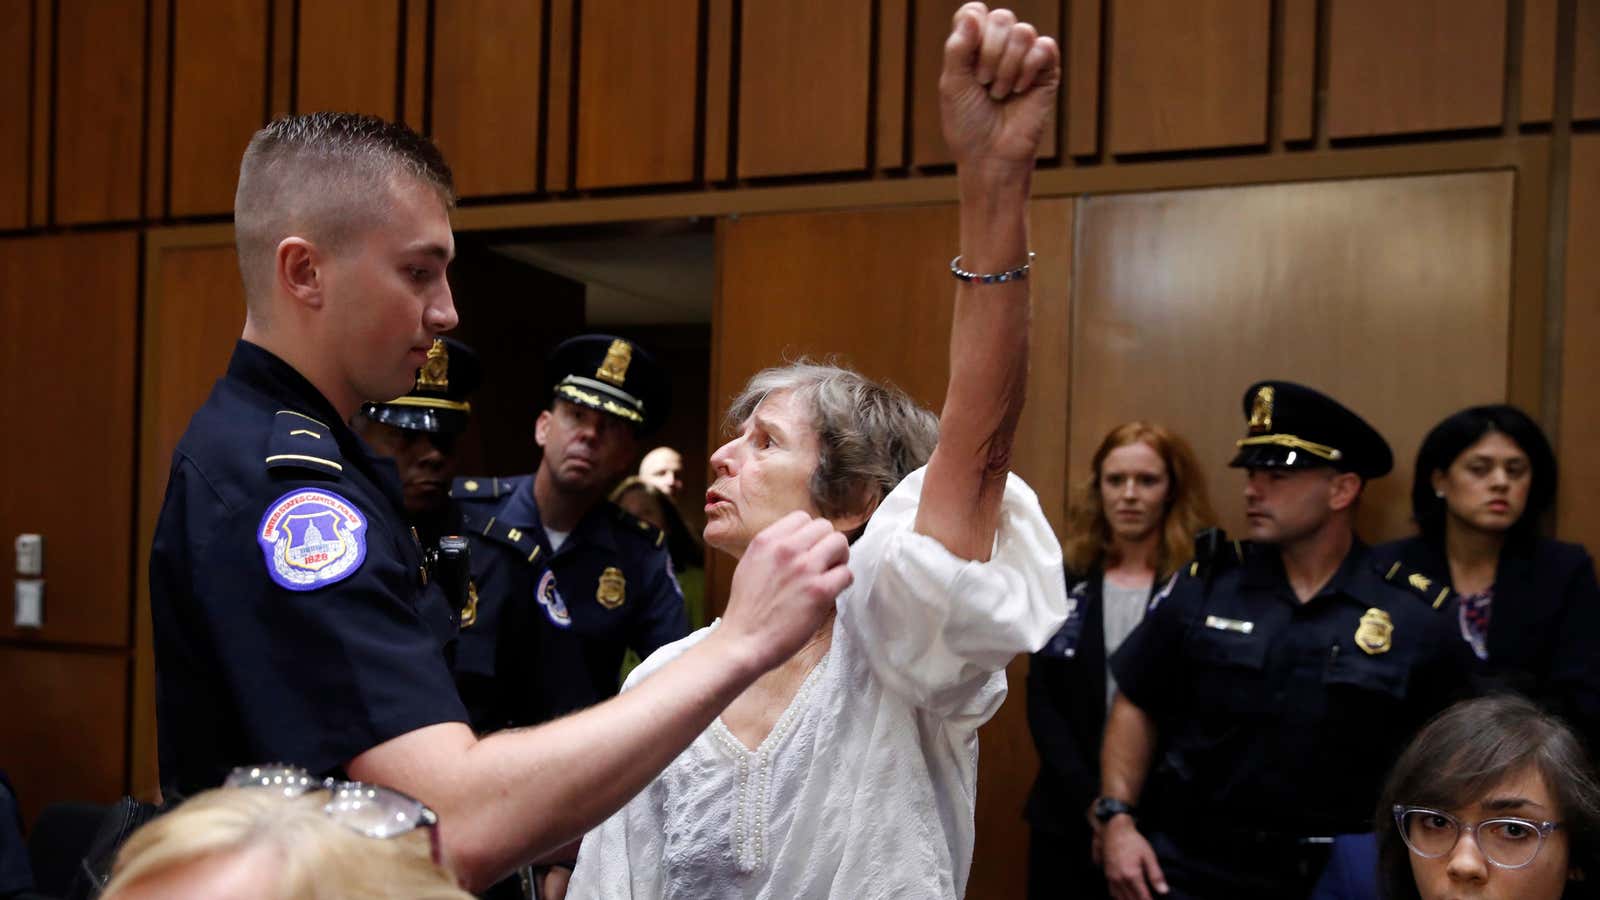 An unidentified protestor is arrested during Kavanaugh’s hearing.